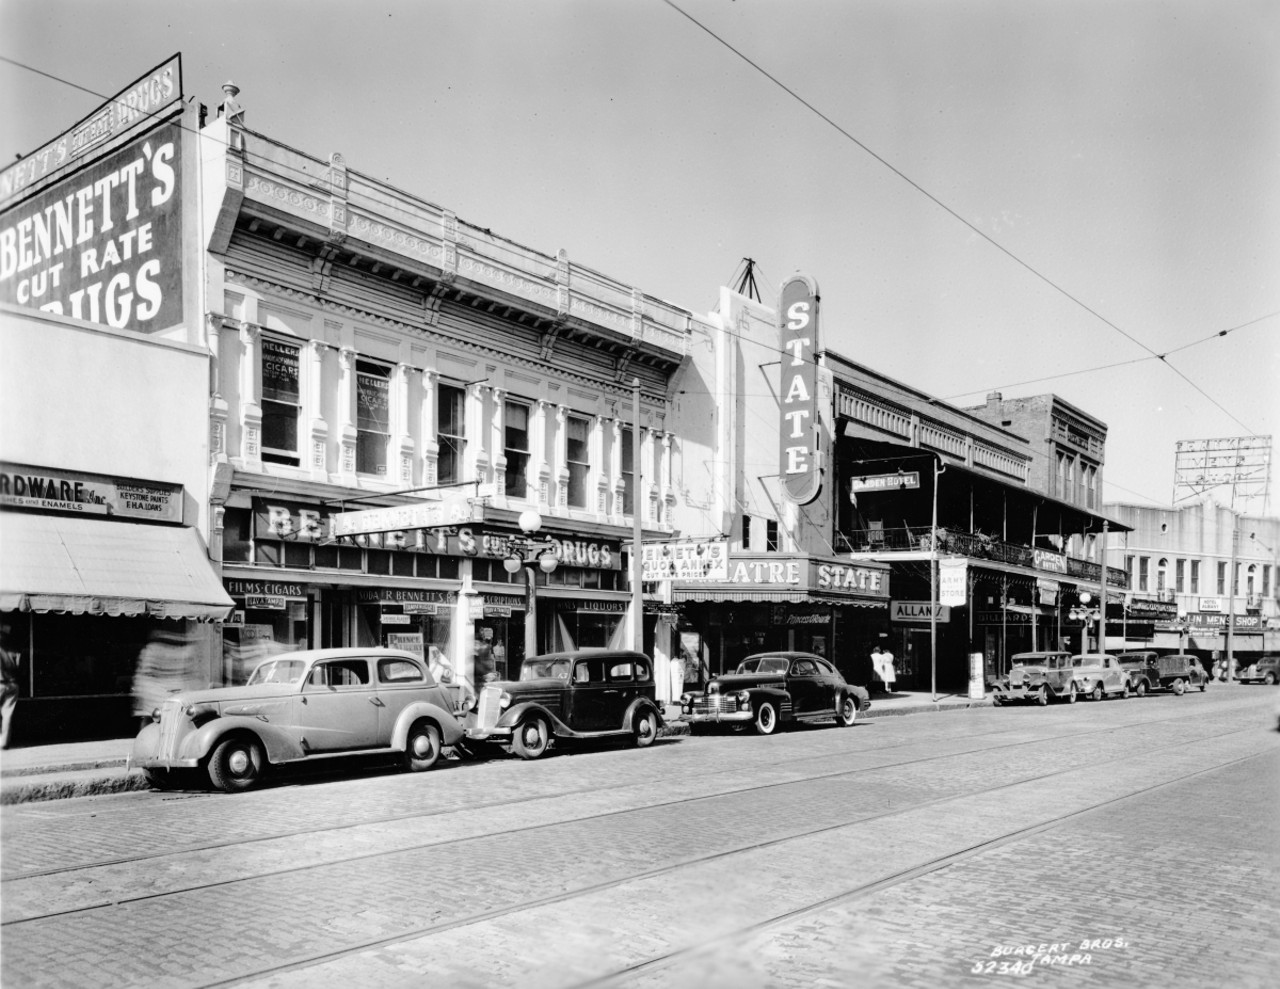 View of stores along Franklin Street - Tampa, Florida (1943).